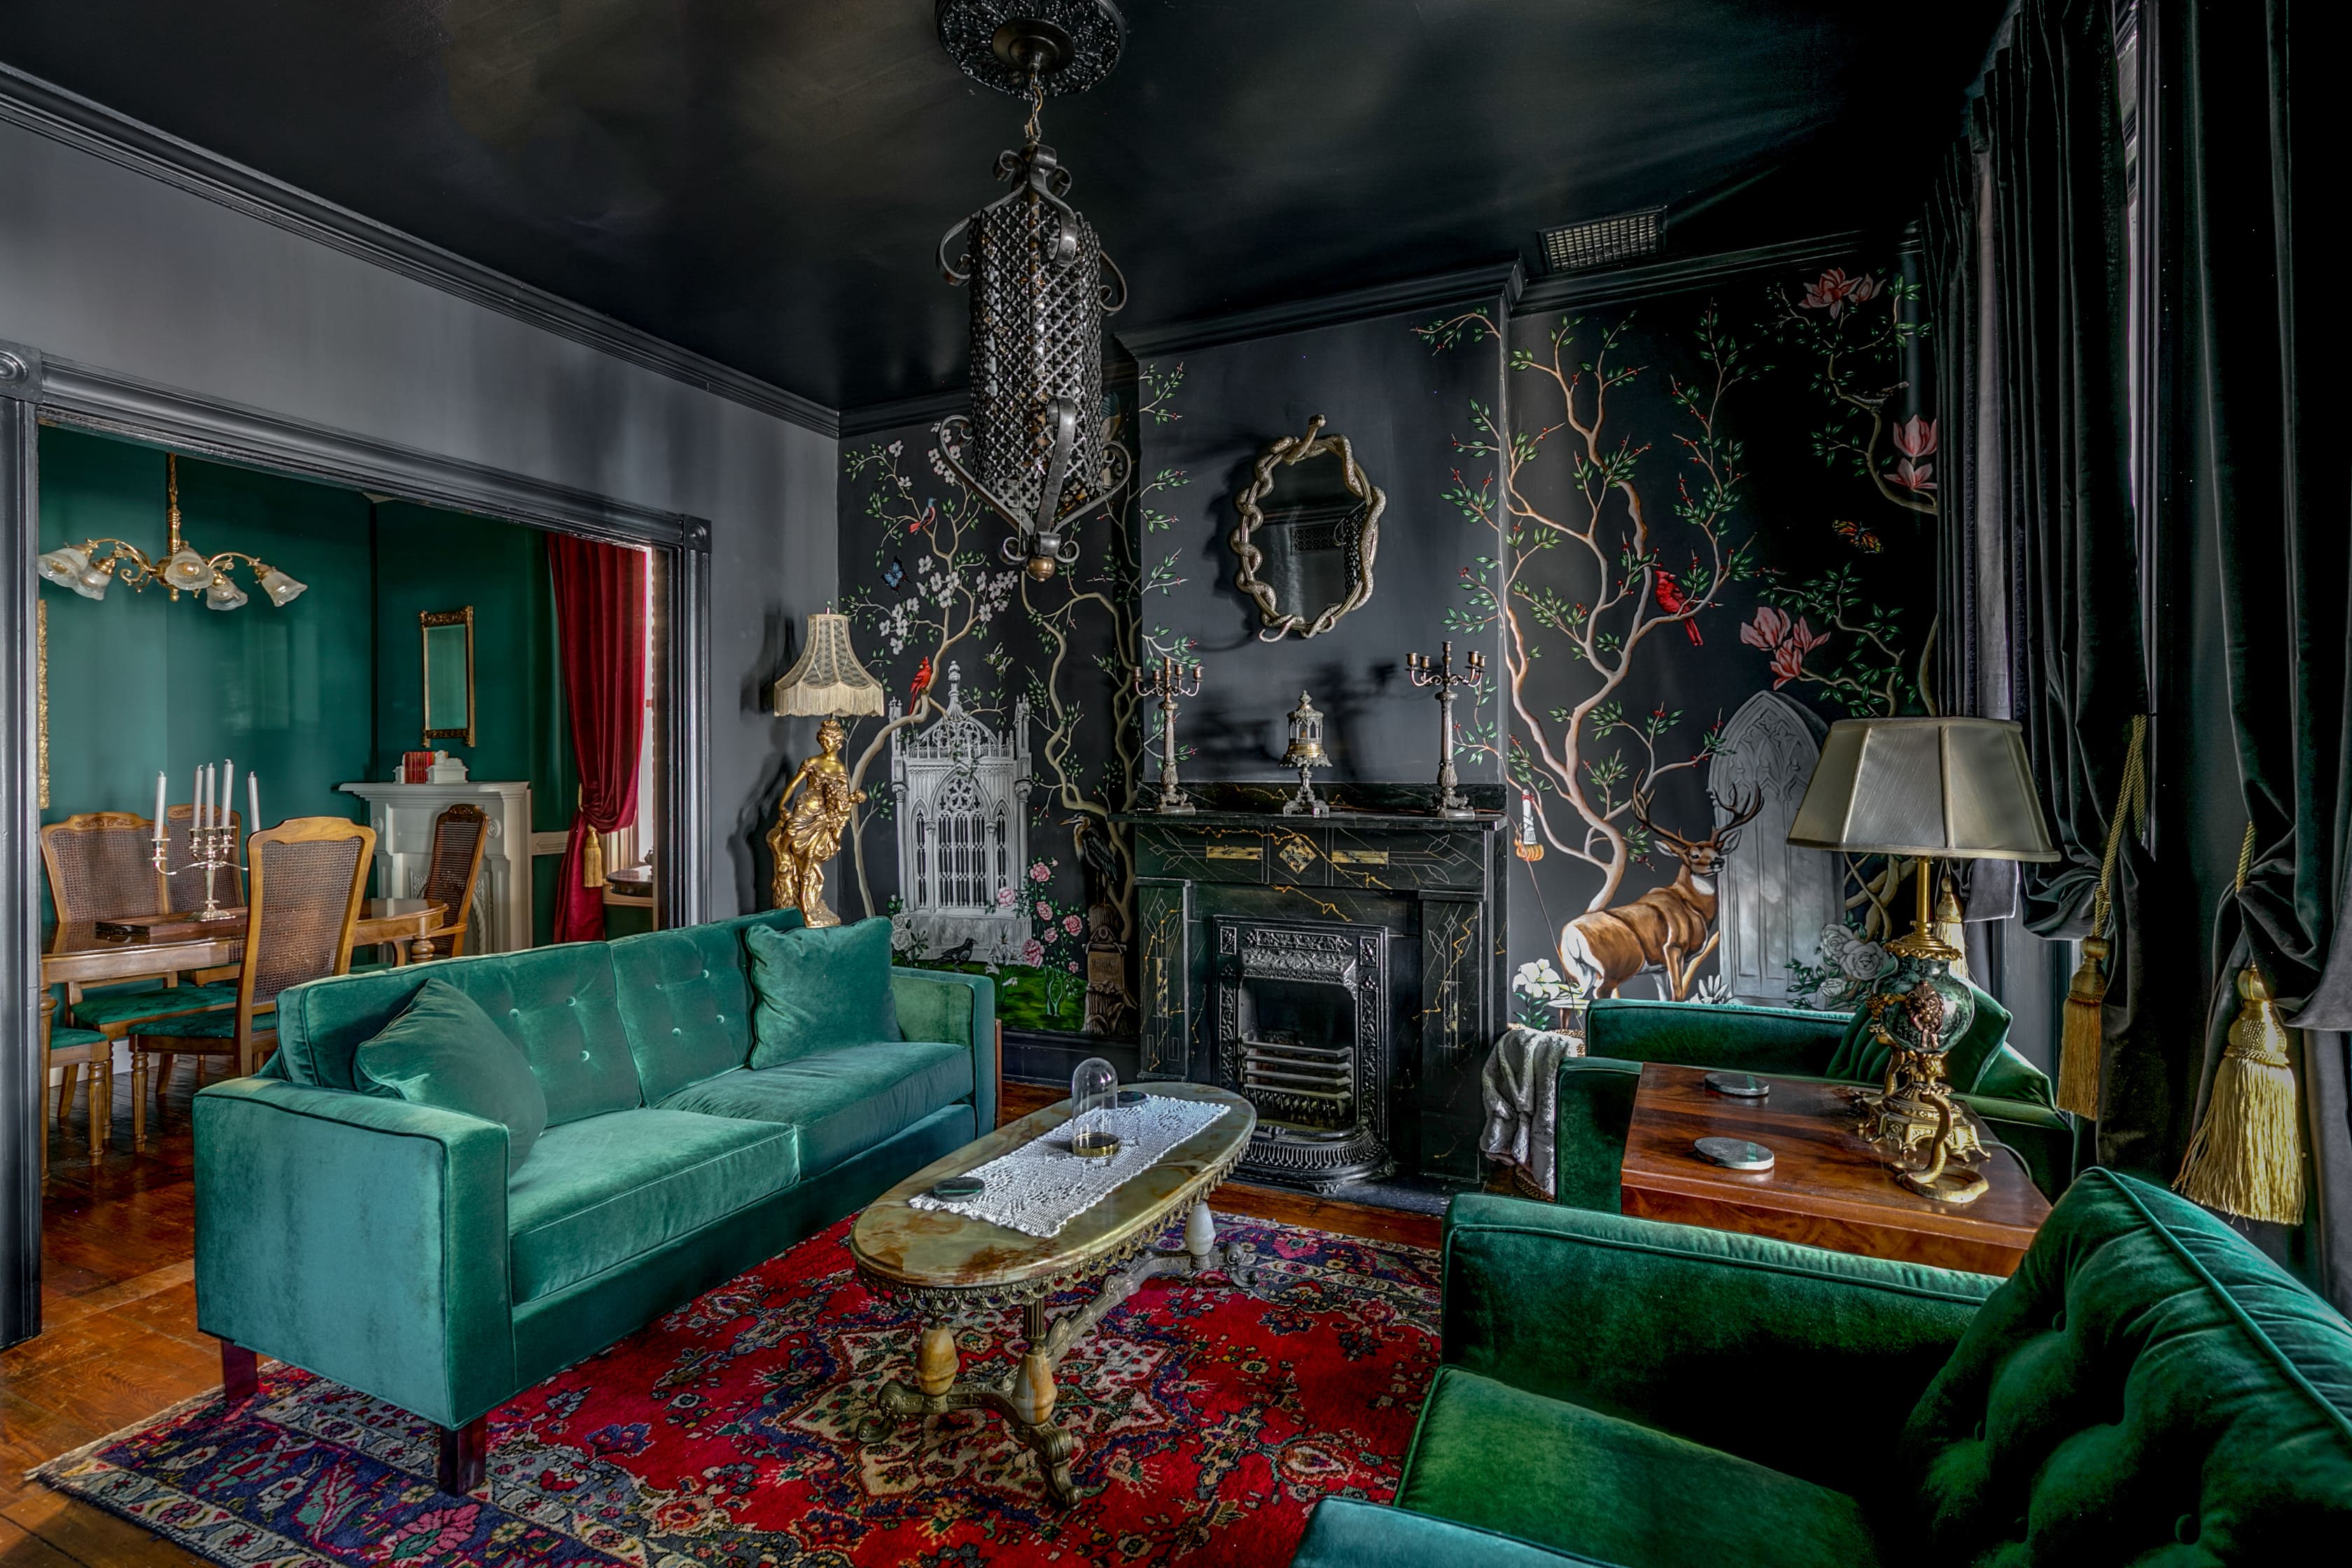 Execute get Stick out Dark Gothic Victorian House Tour Photos | Apartment Therapy